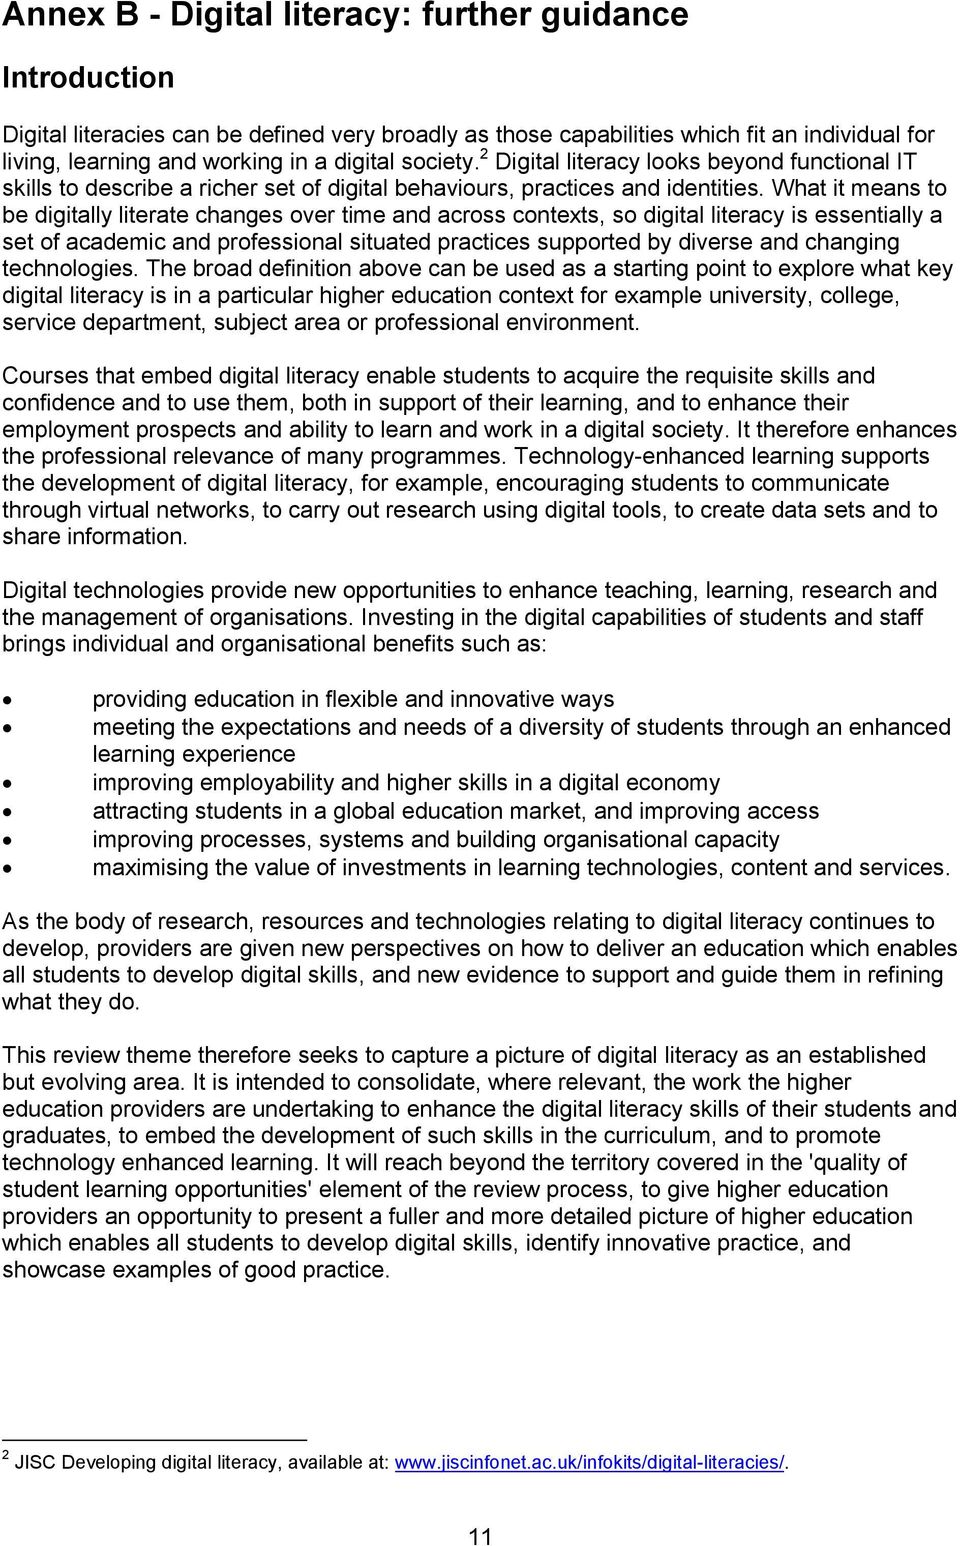 What it means to be digitally literate changes over time and across contexts, so digital literacy is essentially a set of academic and professional situated practices supported by diverse and